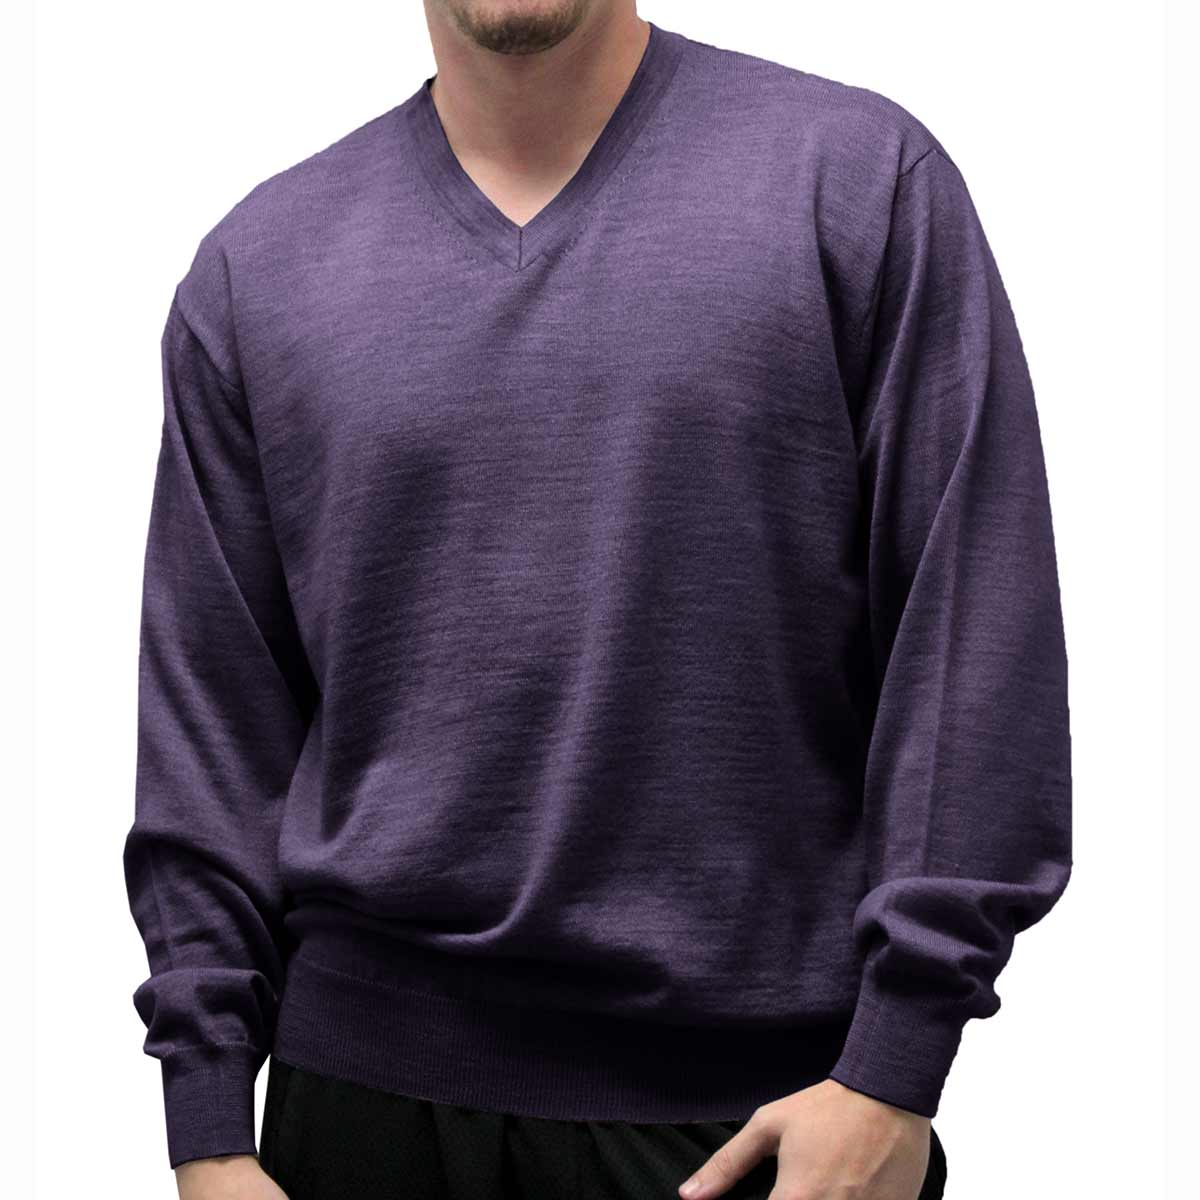 Cellinni Men's Solid V Neck Sweater - Big and Tall 6800-501 - theflagshirt